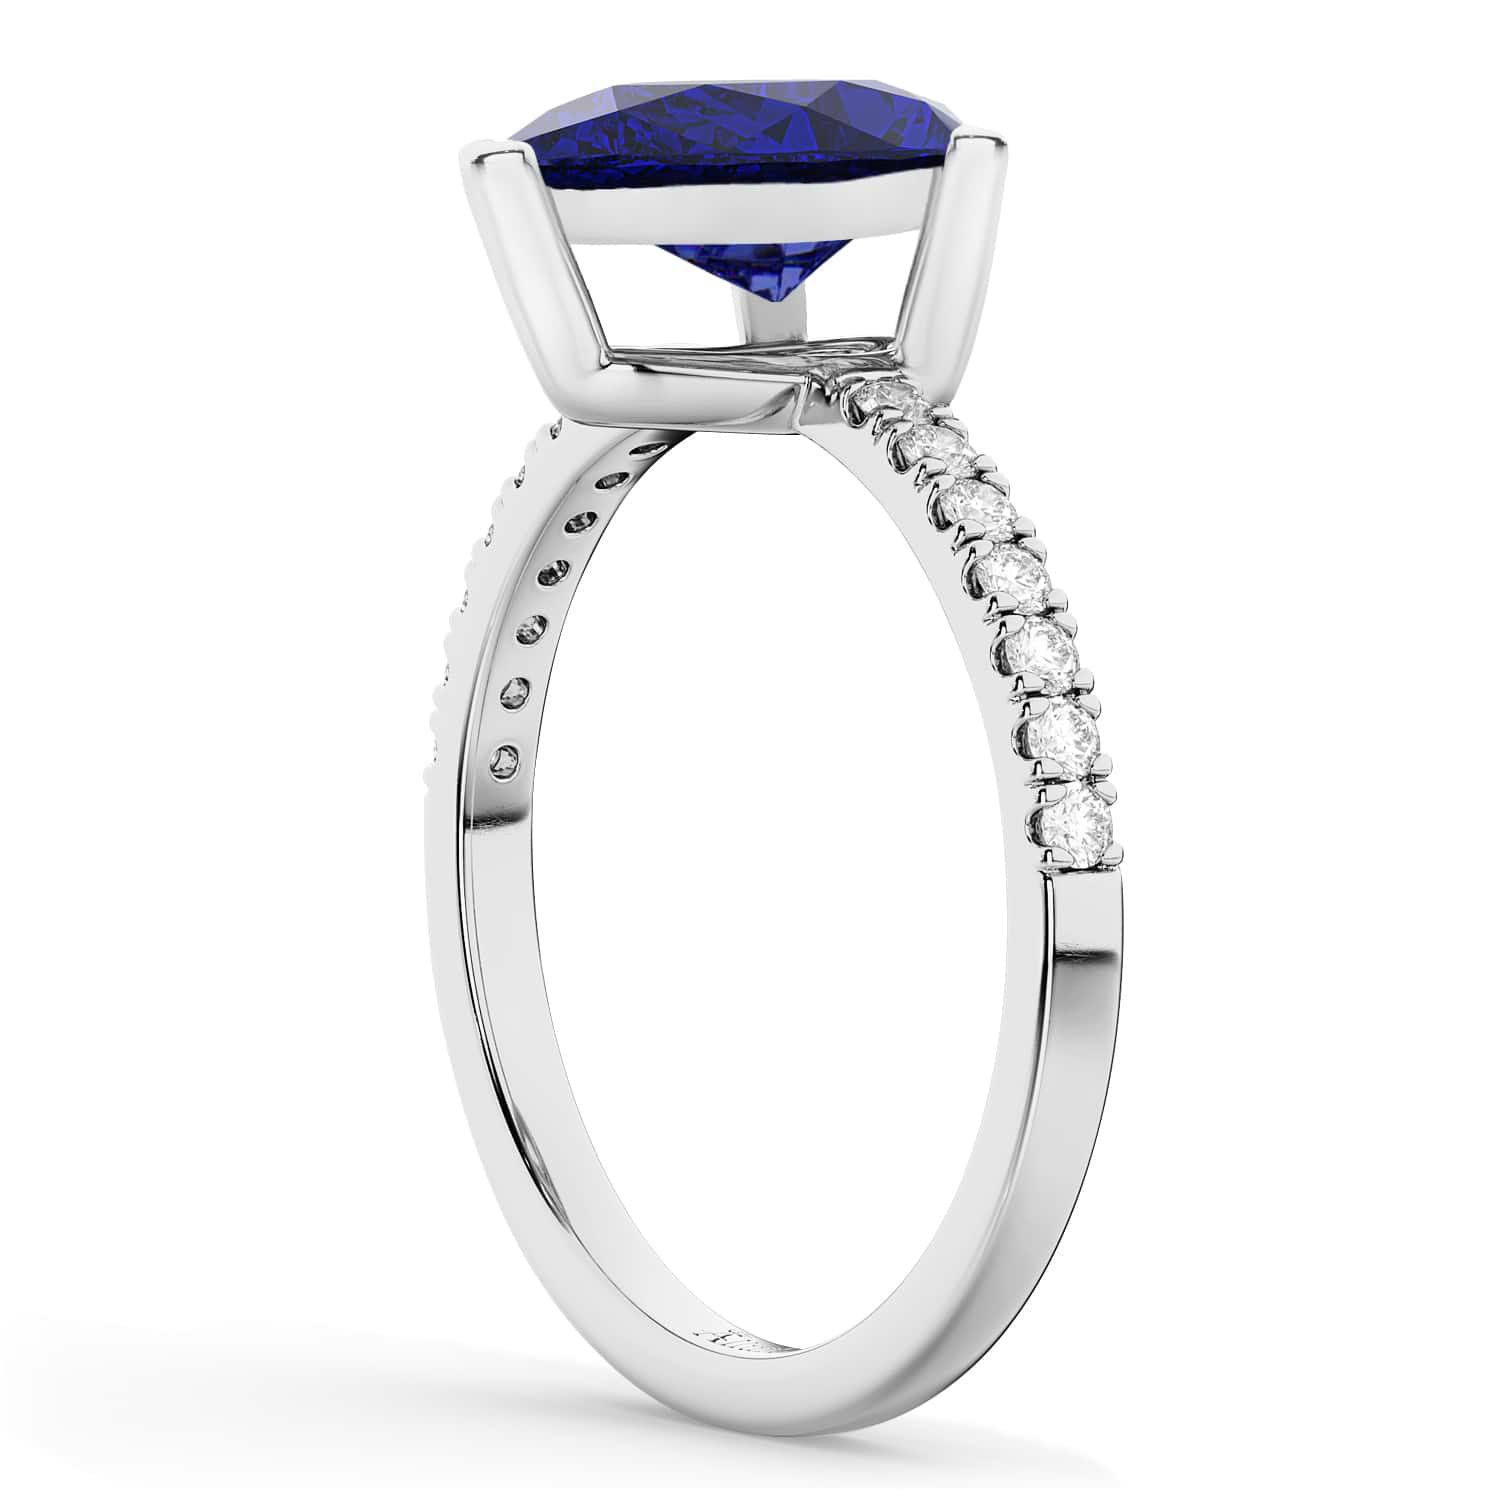 Pear Cut Sidestone Accented Blue Sapphire & Diamond Engagement Ring 14K White Gold 2.71ct